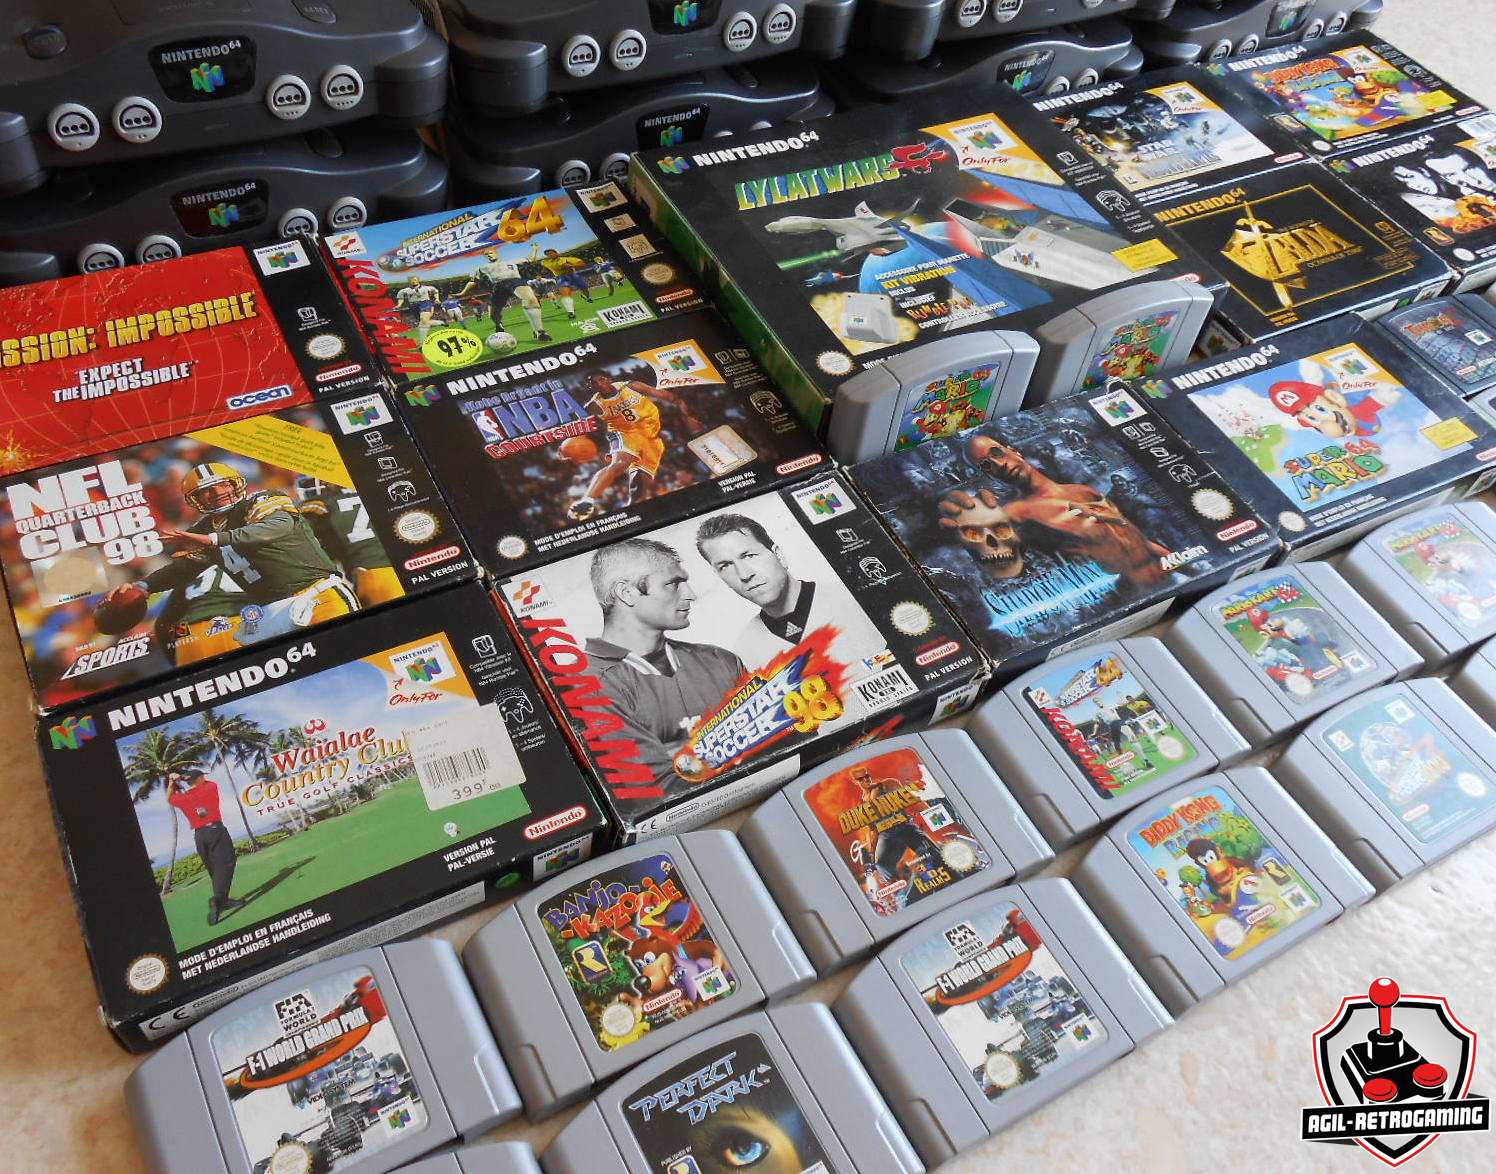 Jeux N64 en boite : ISS, Shadow Man, Mission Impossible